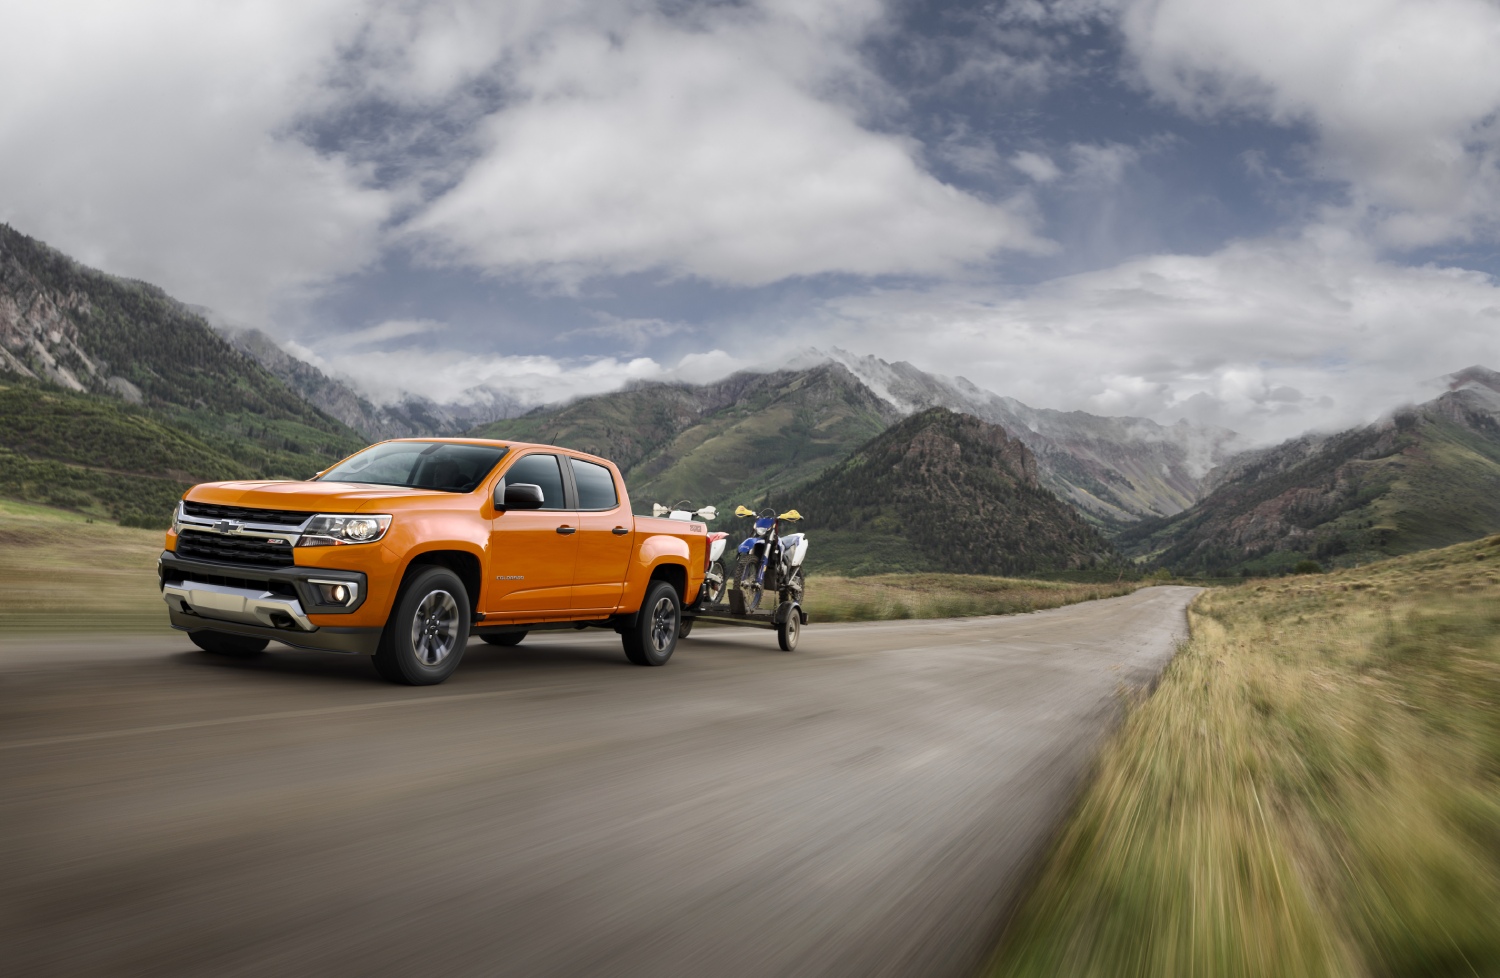 The most truck for your buck can be found in this 2021 Chevrolet Colorado